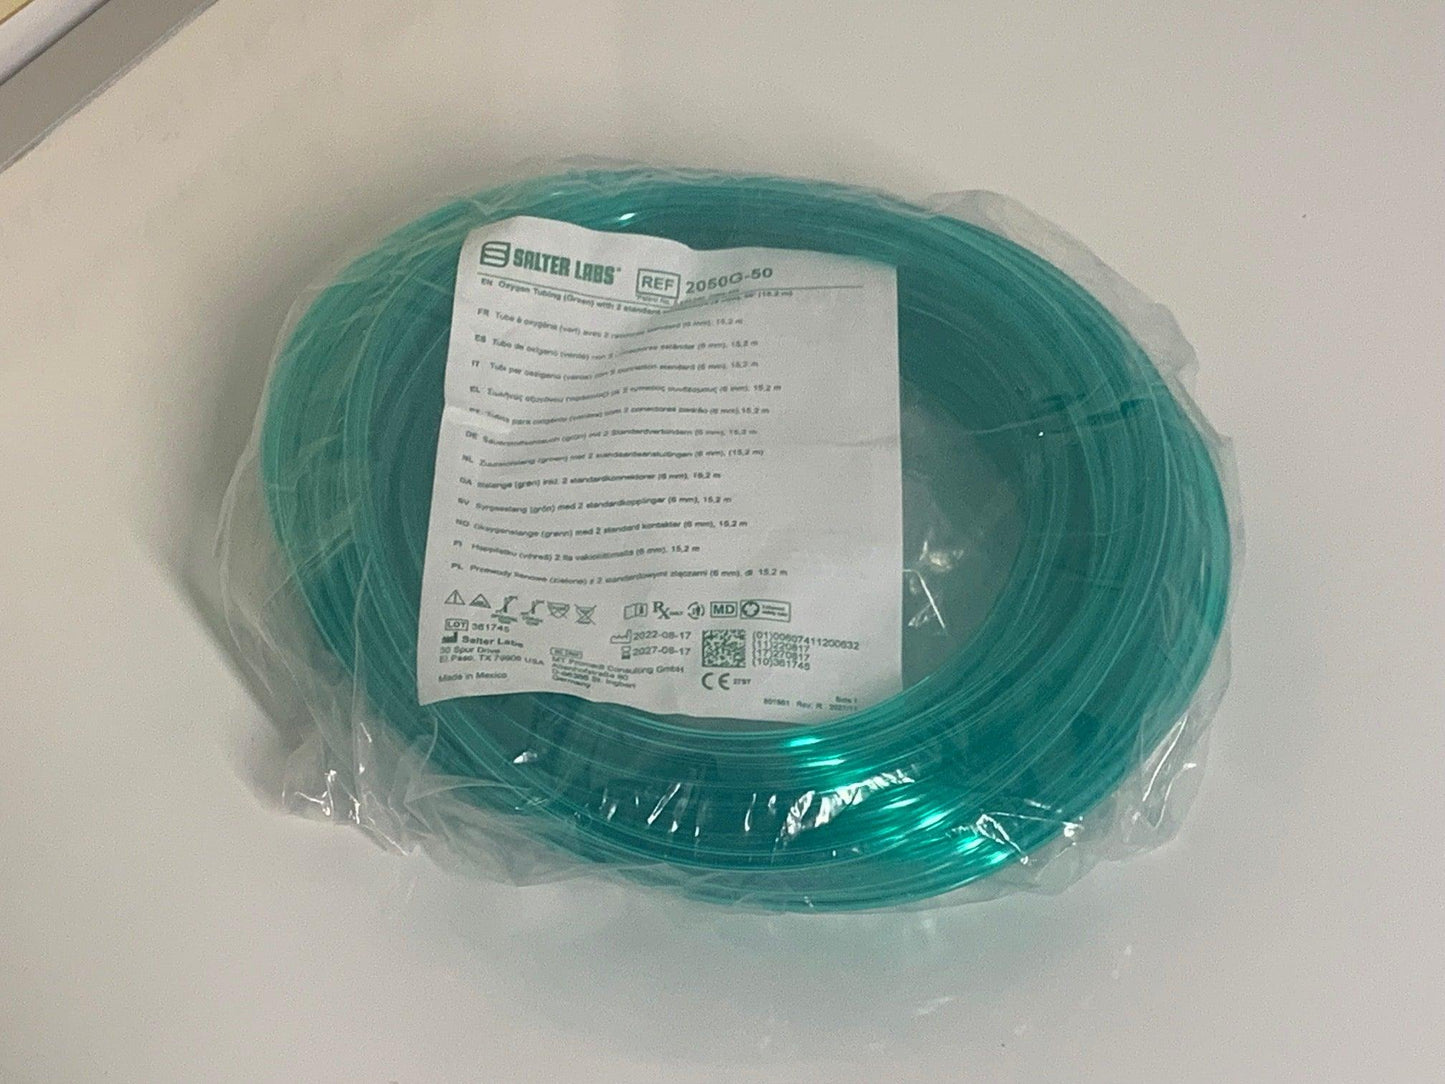 NEW Salter Labs 50' Green Oxygen Tubing 2050G-50 with Adult Soft Oxygen Nasal Cannula with Barbed Connector 16SOFT-B-0 - MBR Medicals